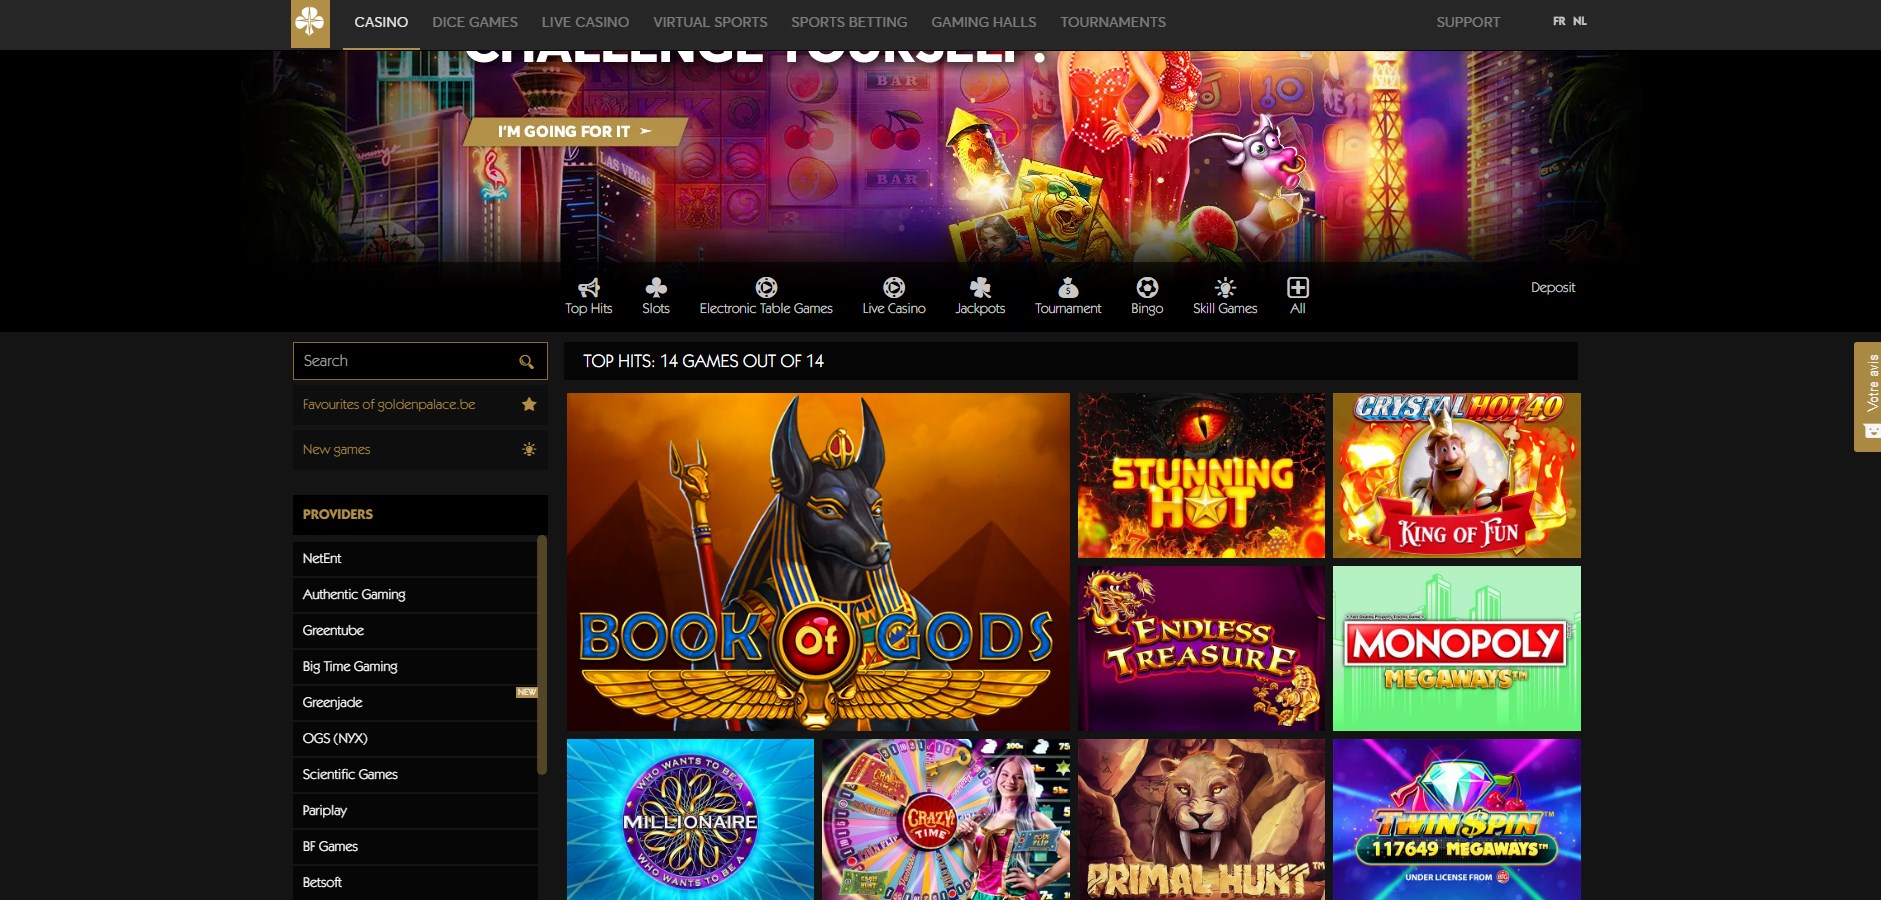 Golden Palace (BE) Casino Games